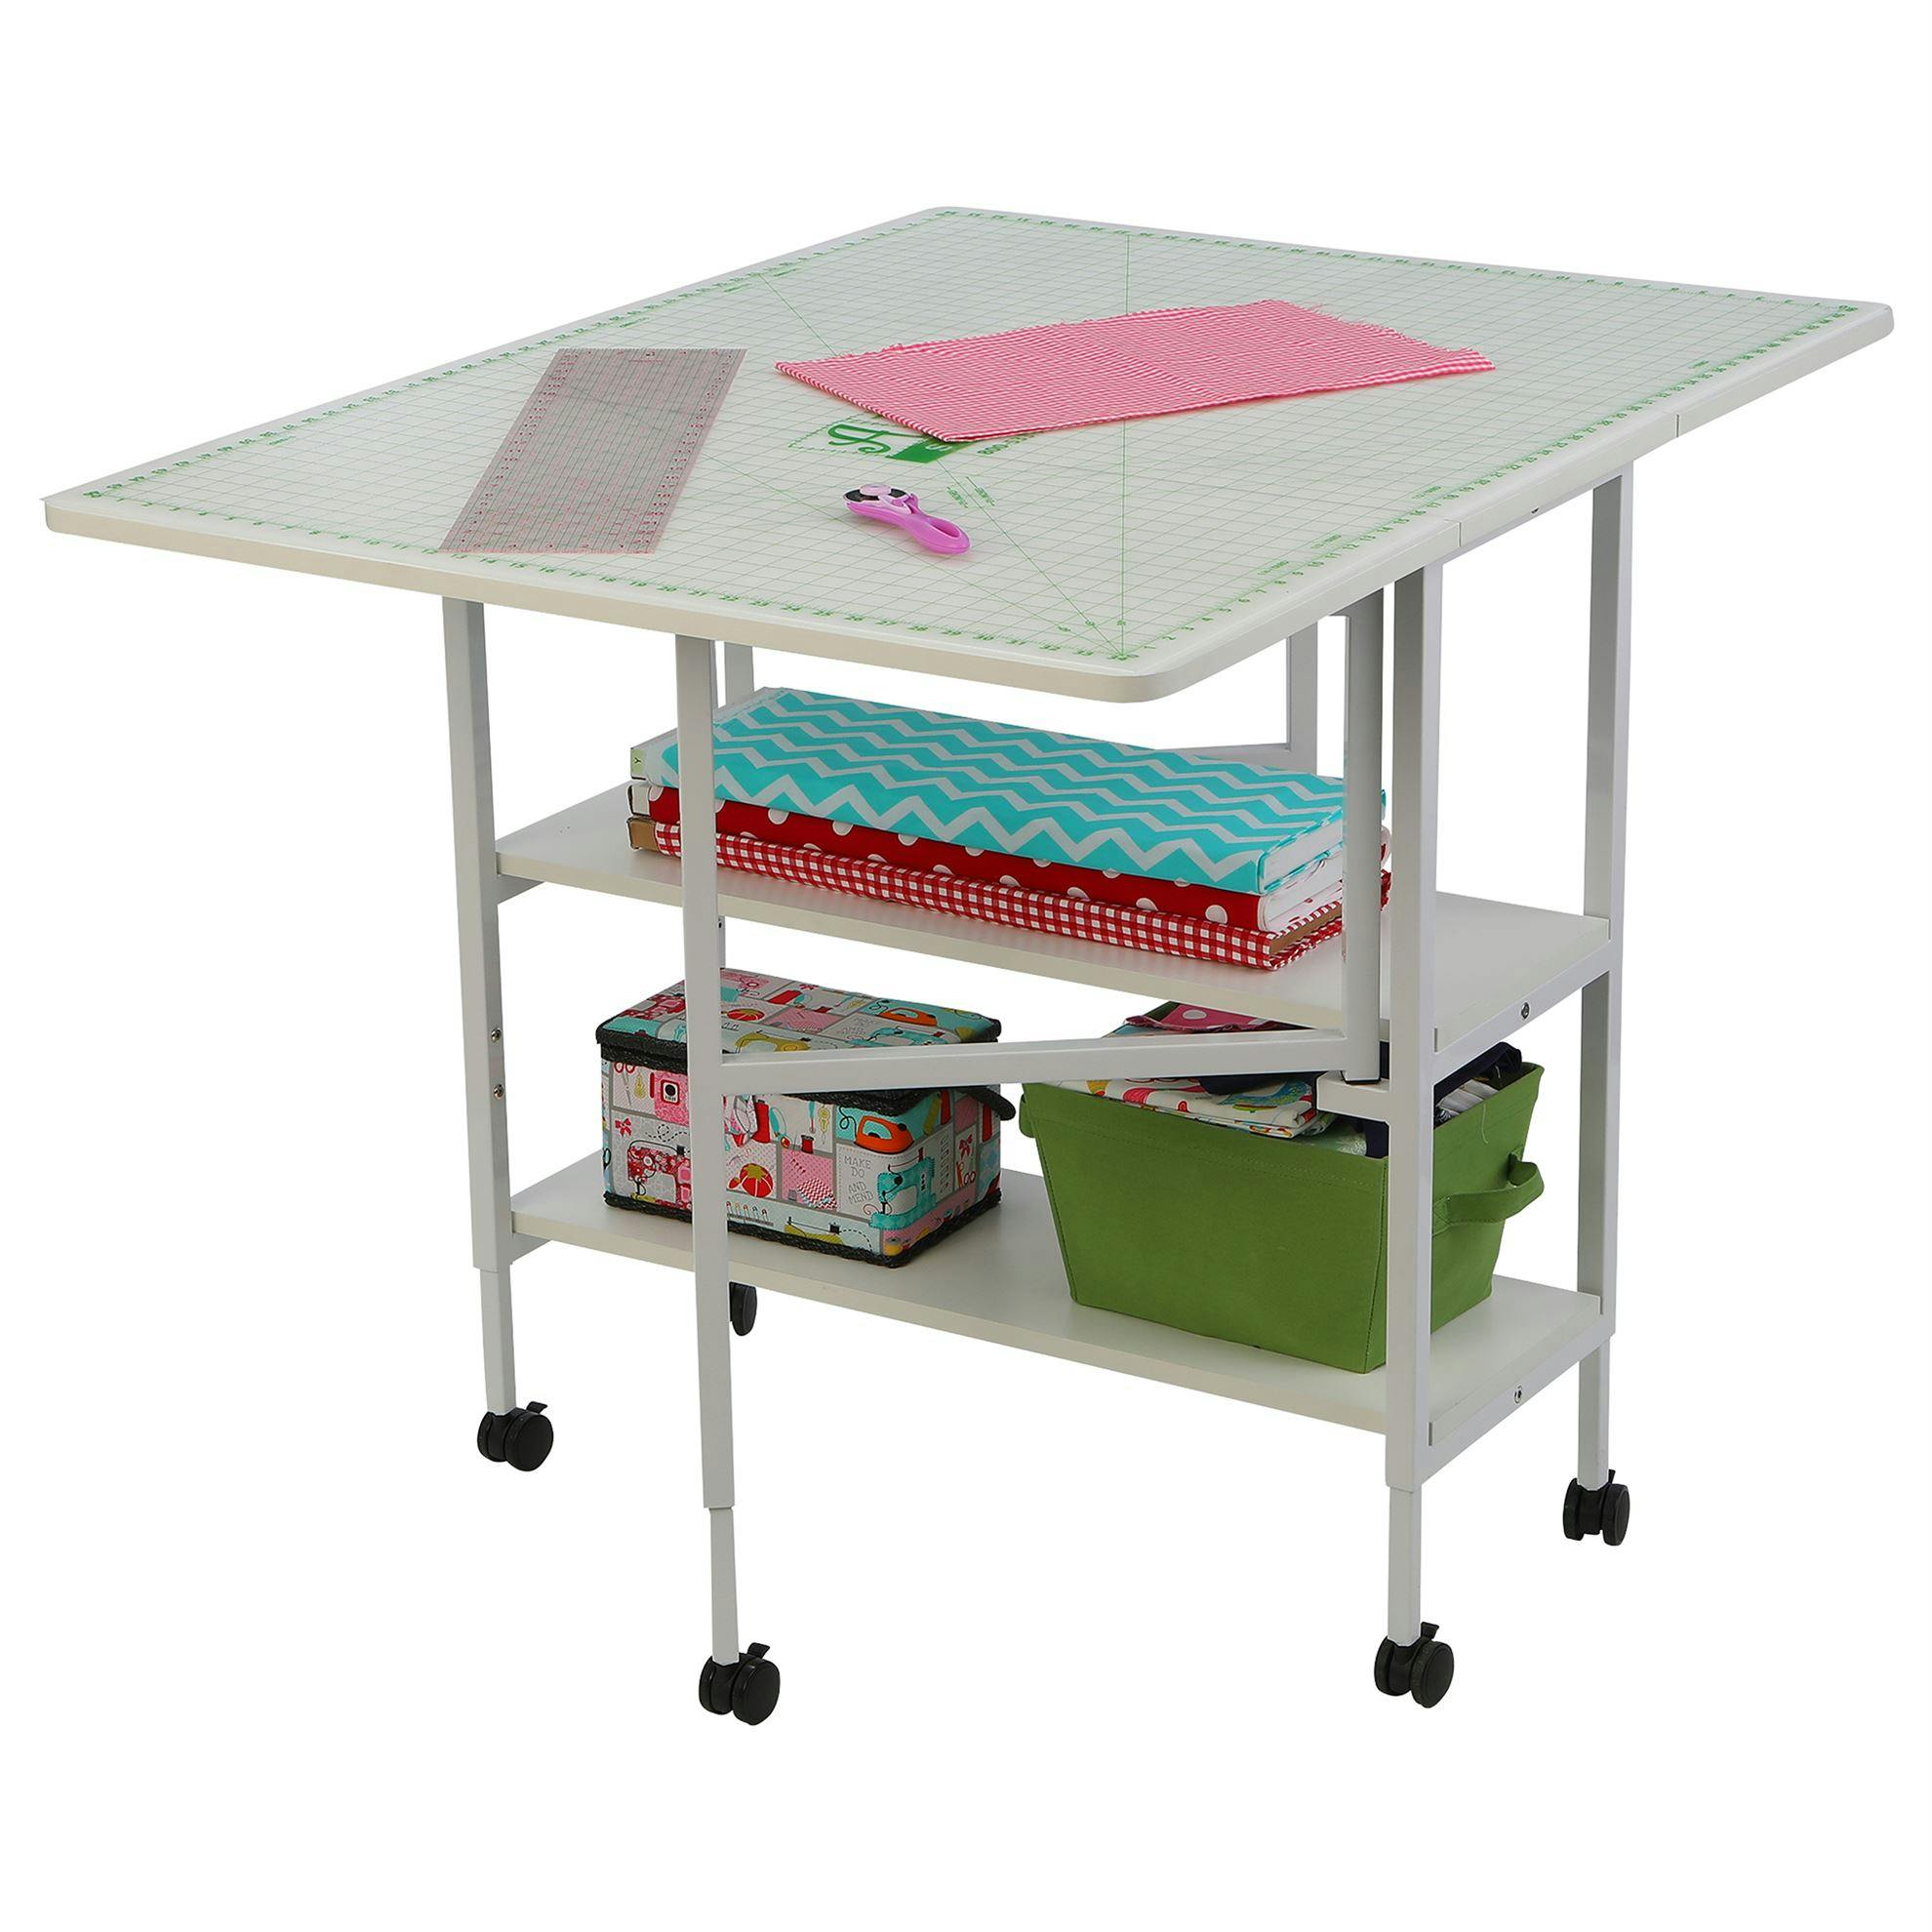 photo of Arrow Dixie Cutting Table with cutting mat an stored items